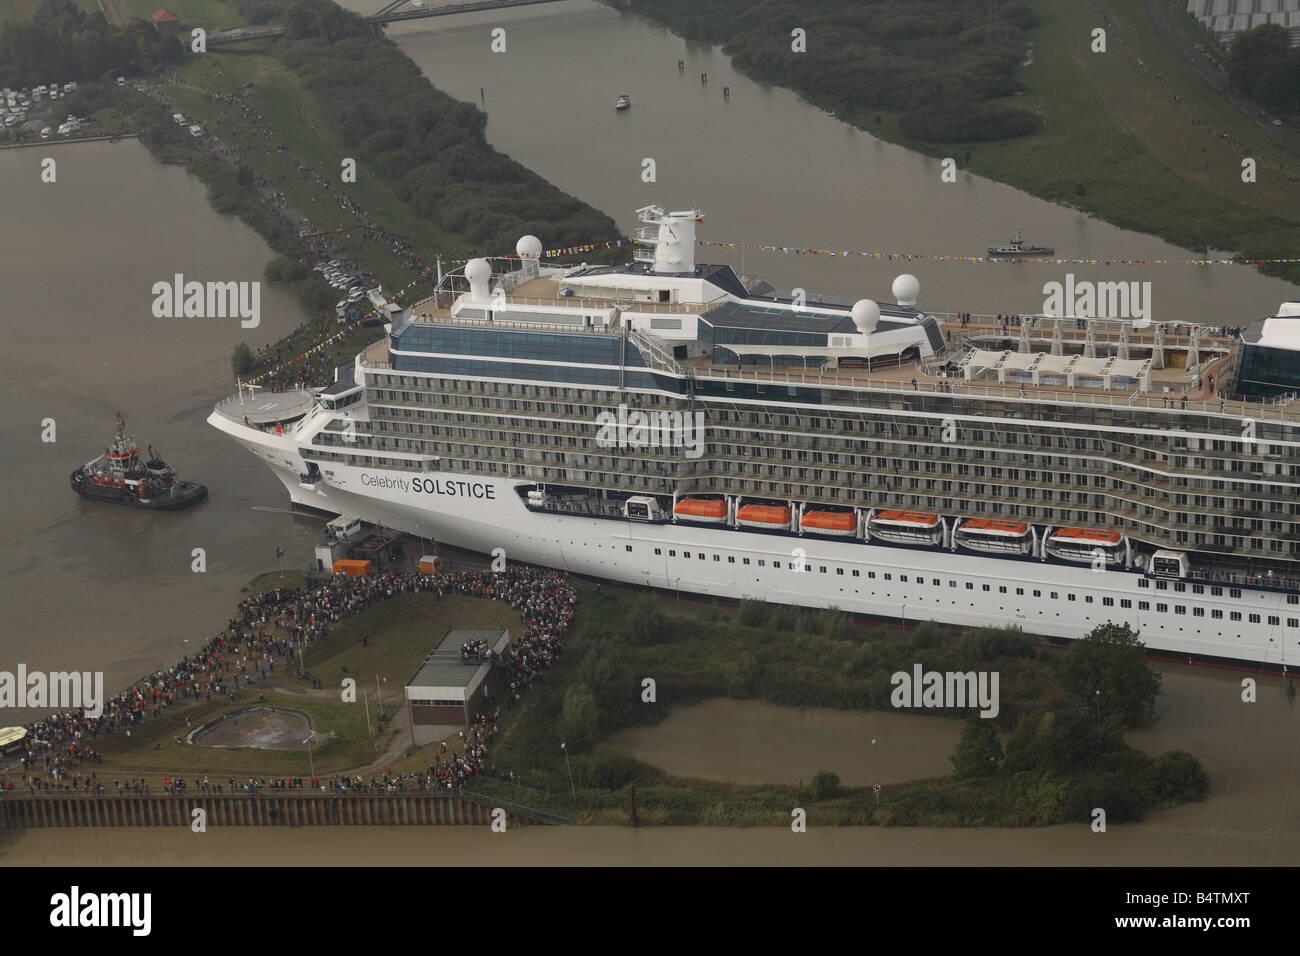 Cruise ship Celebrity Solstice is moved from the Meyer Werft shipyard where she was built out onto the river Emms. Stock Photo